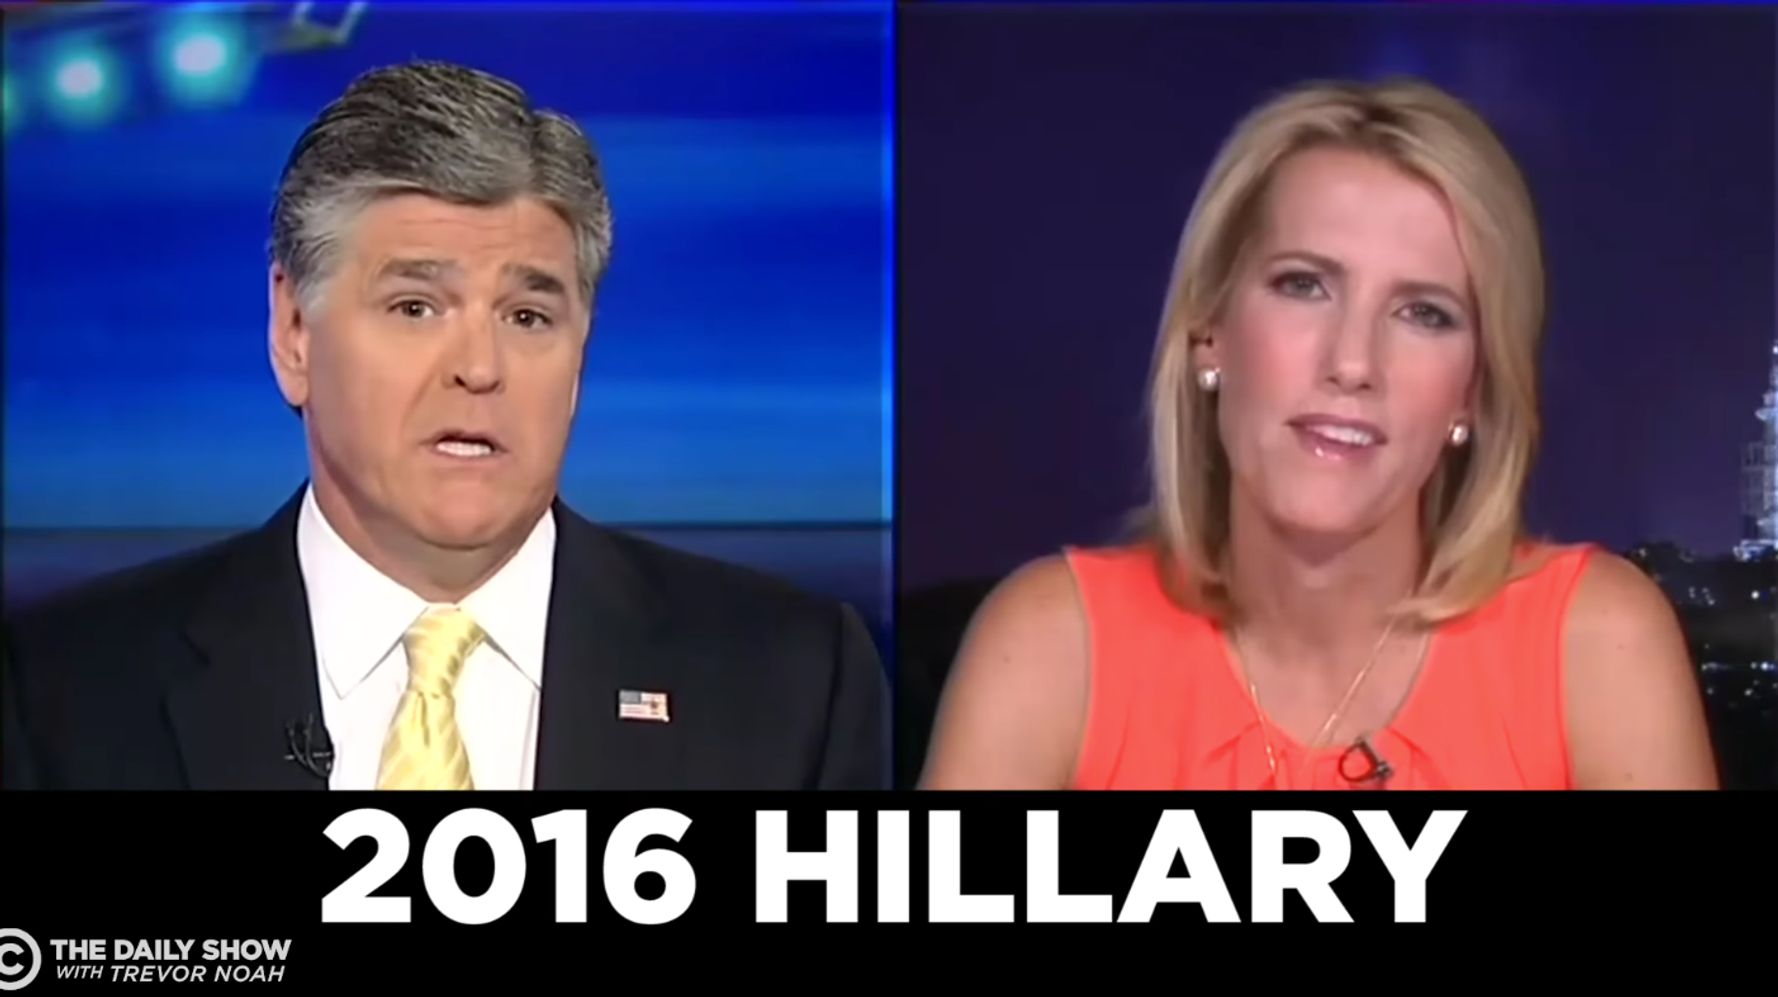 'The Daily Show' Highlights The Strange Pattern In Sean Hannity's Election Coverage